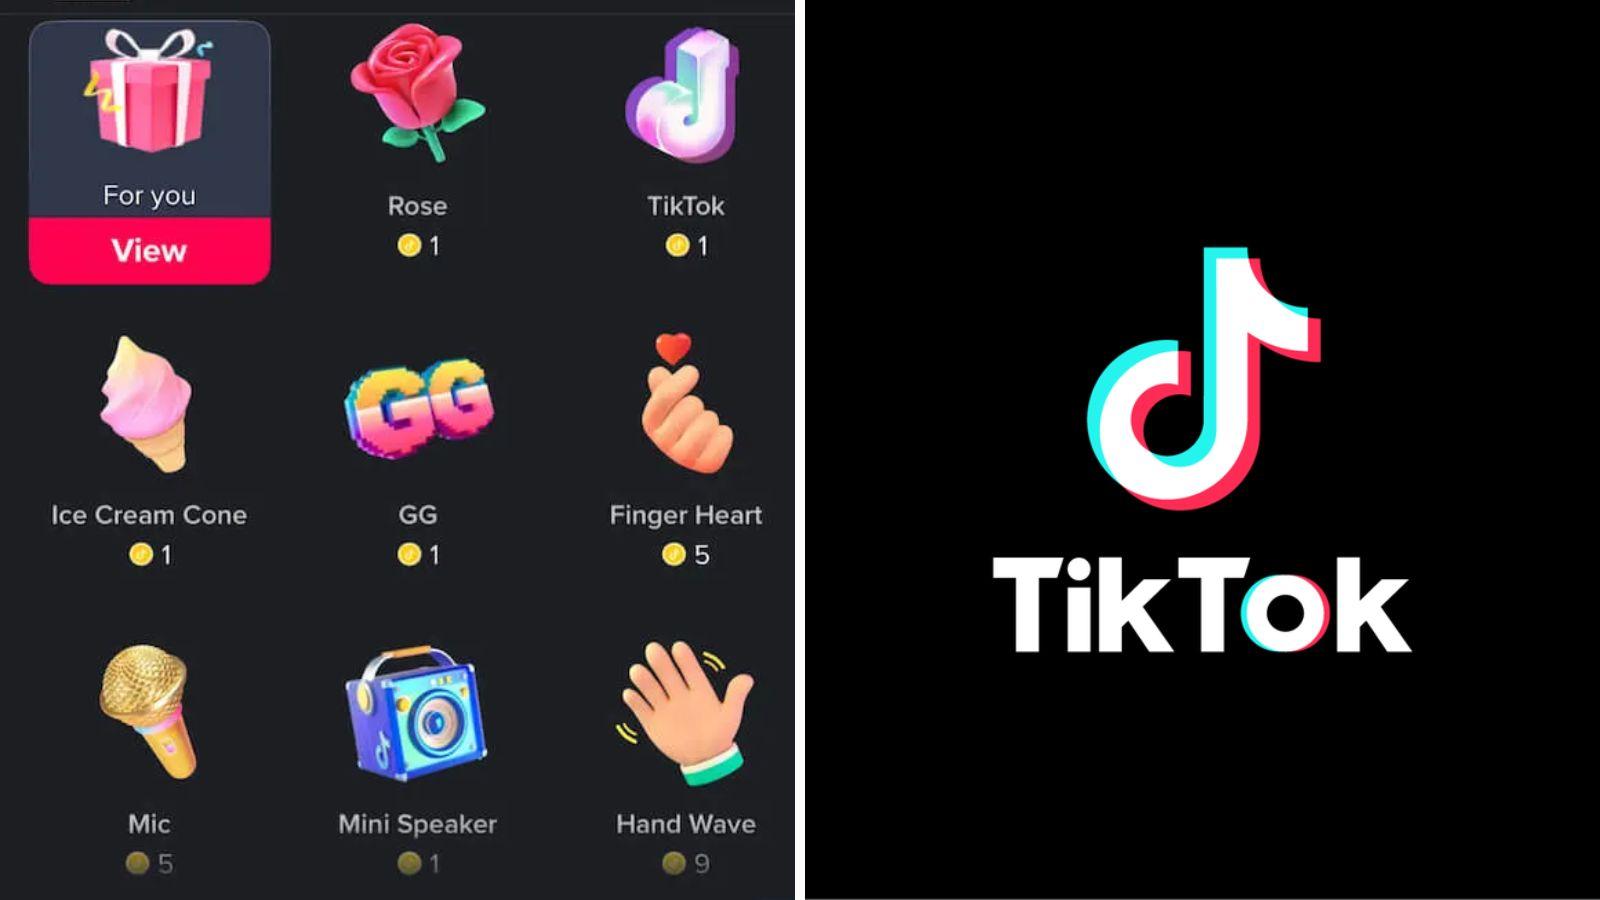 Why do people send live gifts to others on TikTok? - Quora